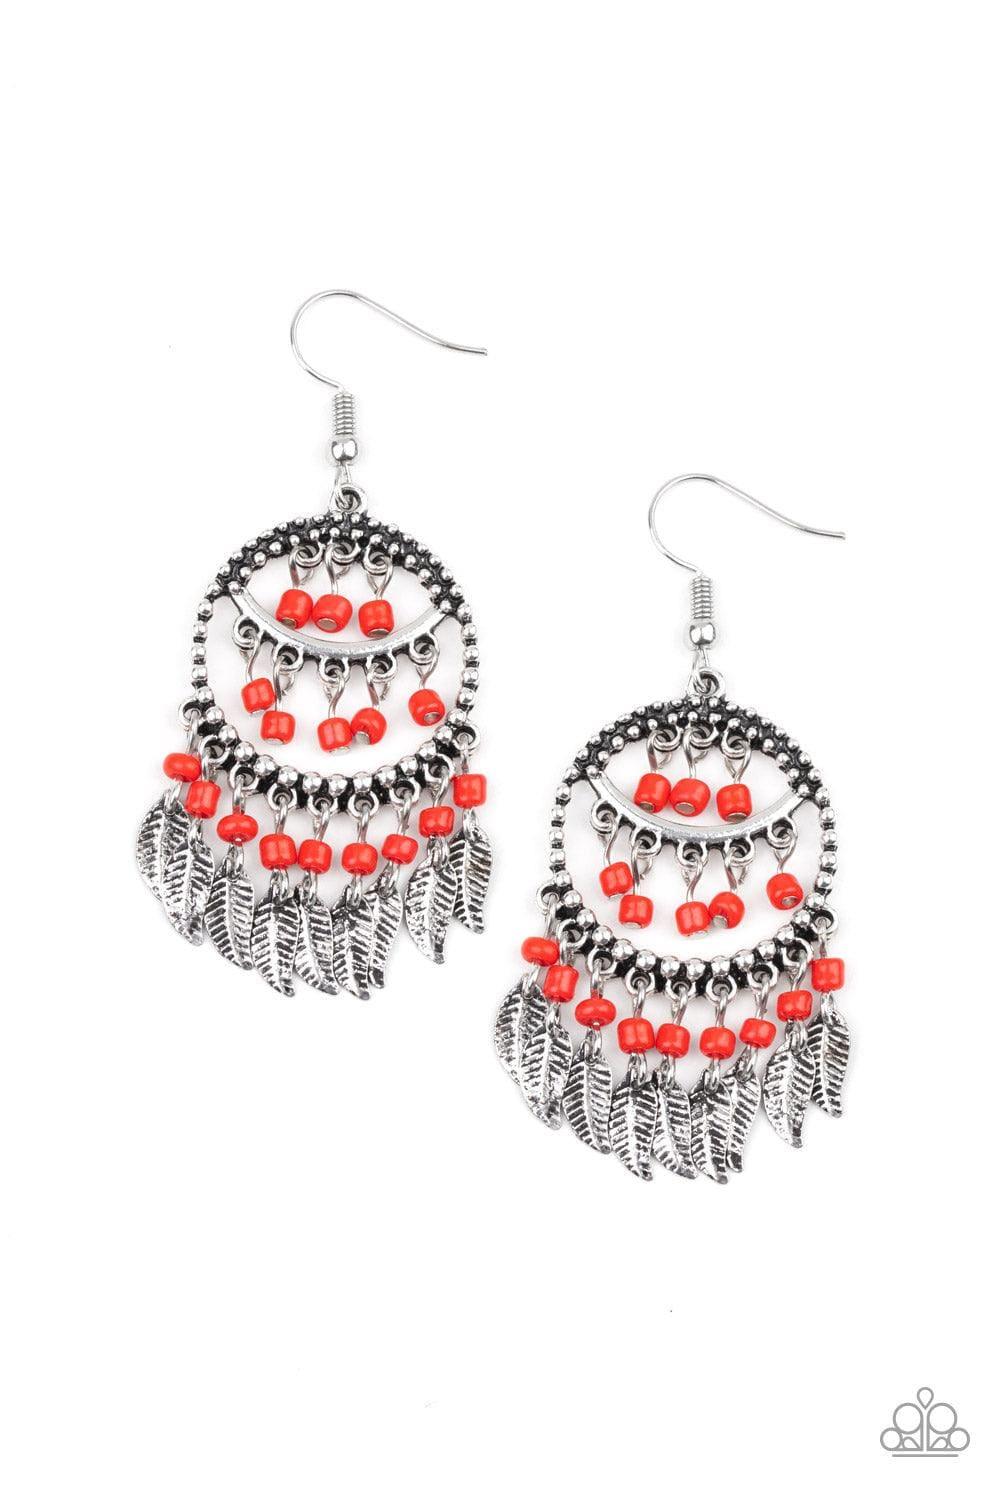 Paparazzi Accessories - Herbal Remedy - Red Earrings - Bling by JessieK